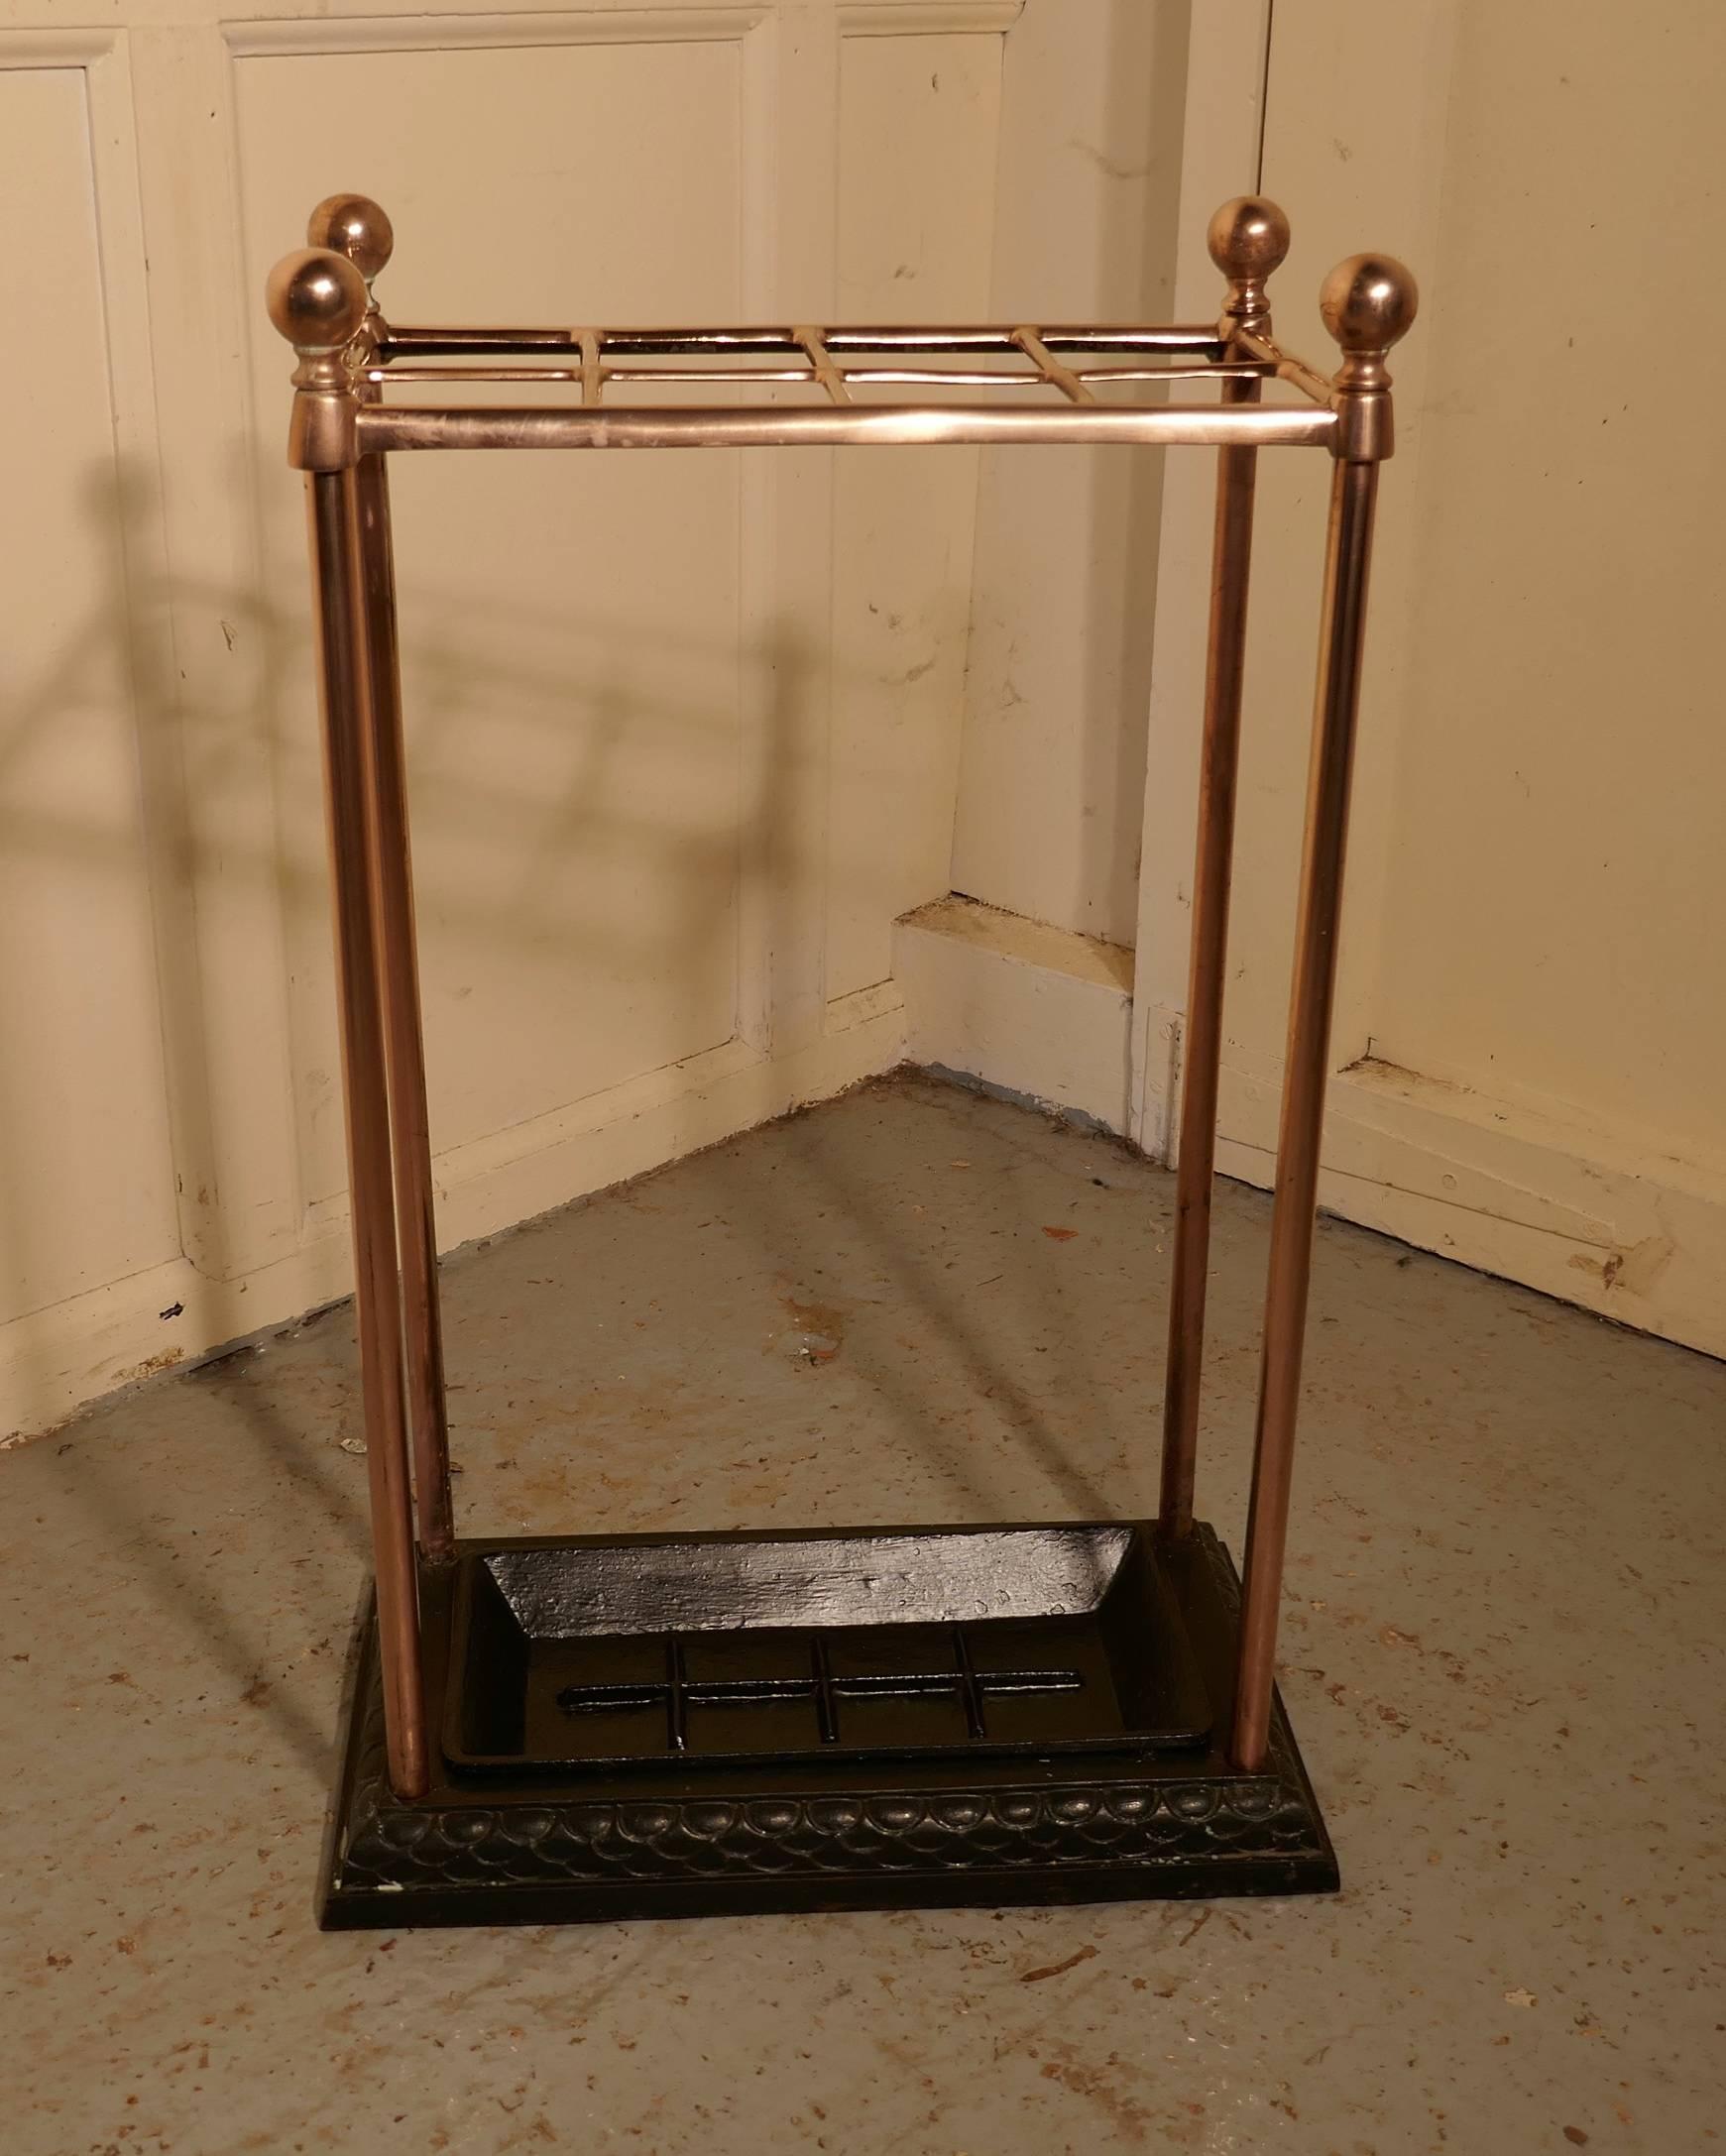 A Victorian copper and cast Iron walking stick stand or umbrella stand

A charming piece, the stand has a copper top divided into eight sections to hold either walking sticks or umbrellas, the heavy iron base holds the drip tray
The stand is 26”